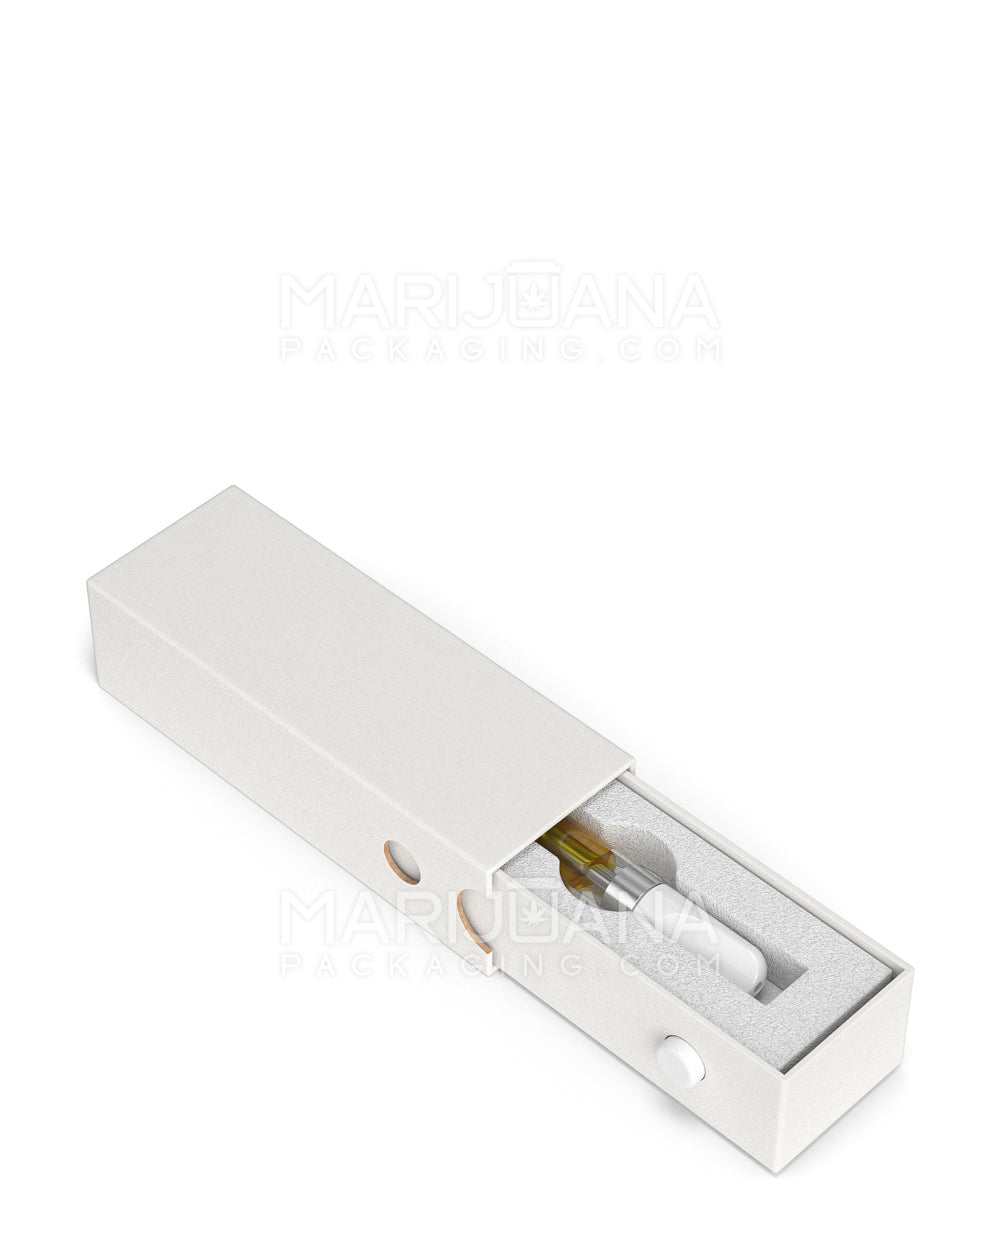 Child Resistant & Sustainable | 100% Recyclable Cardboard Vape Cartridge Box w/ Button & Foam Insert | 100mm - White  - 2